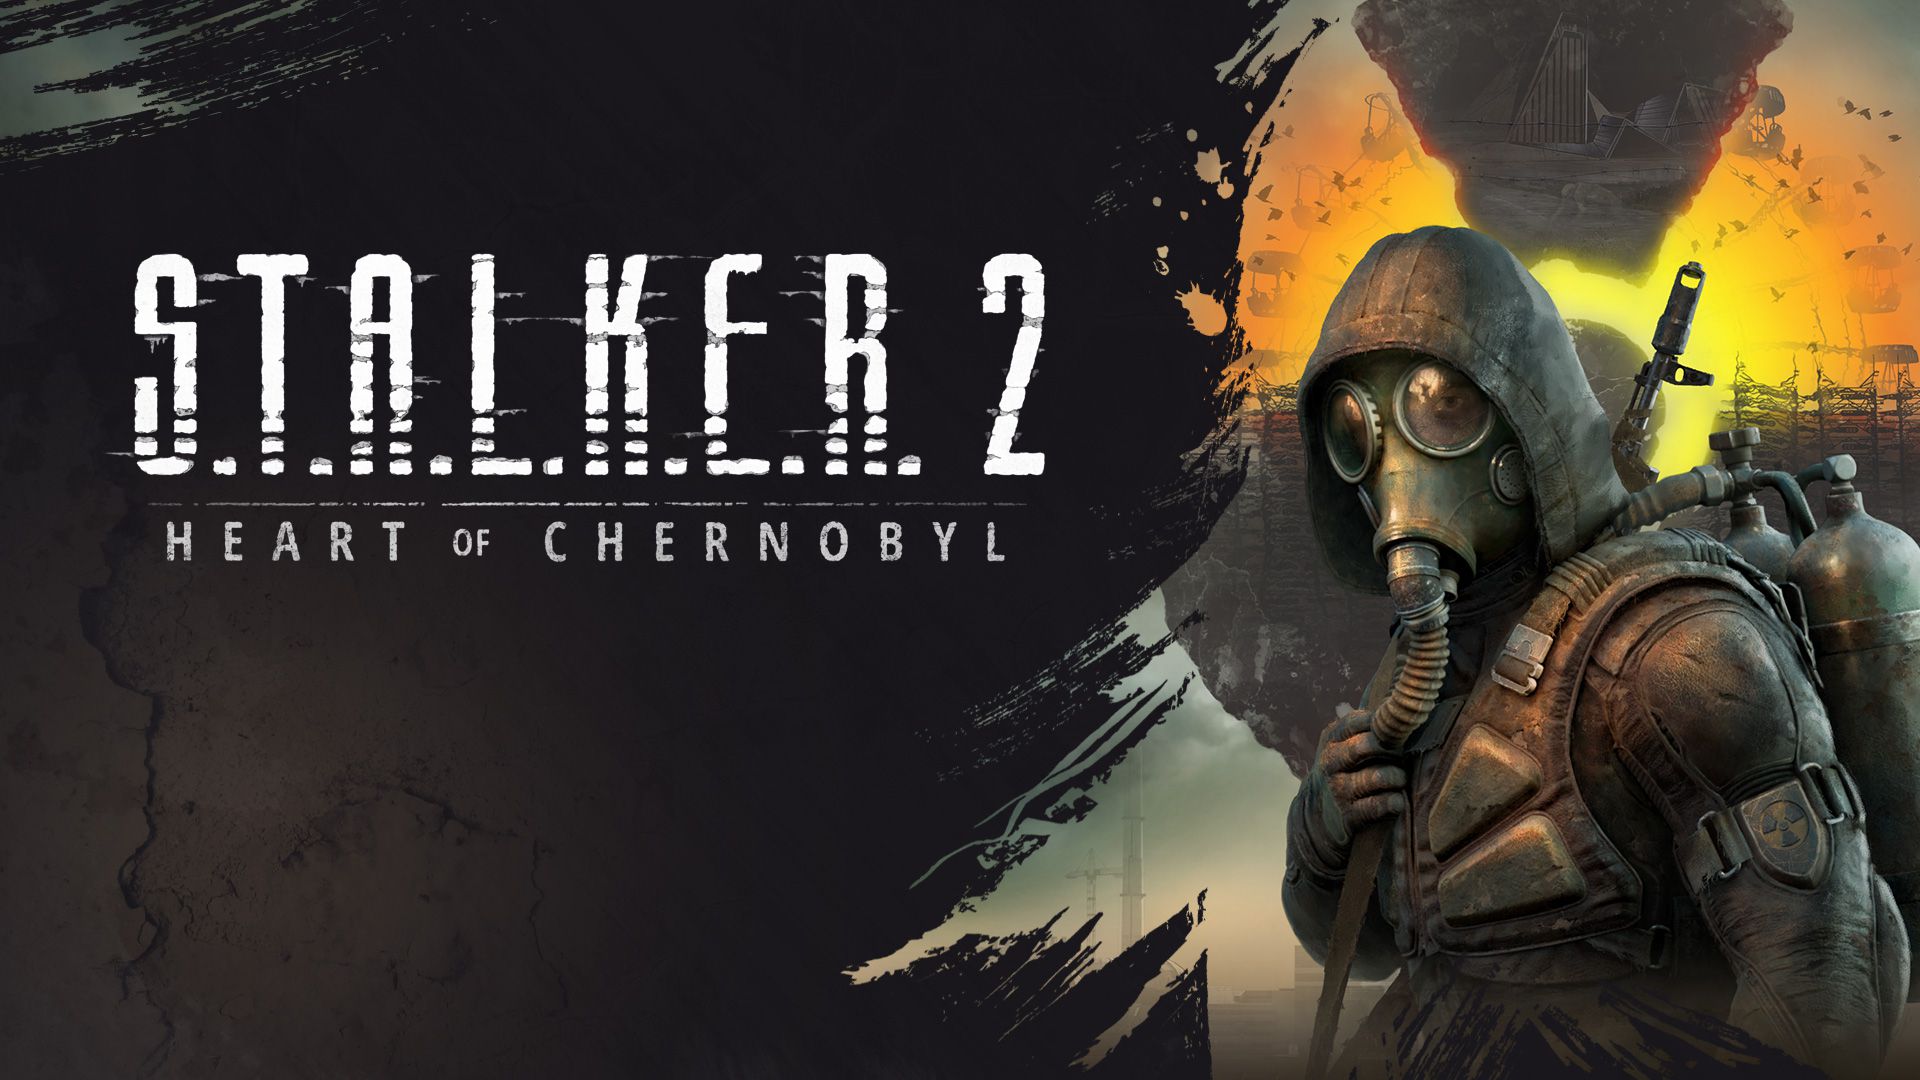 S.T.A.L.K.E.R. 2: Heart of Chernobyl instal the new for windows